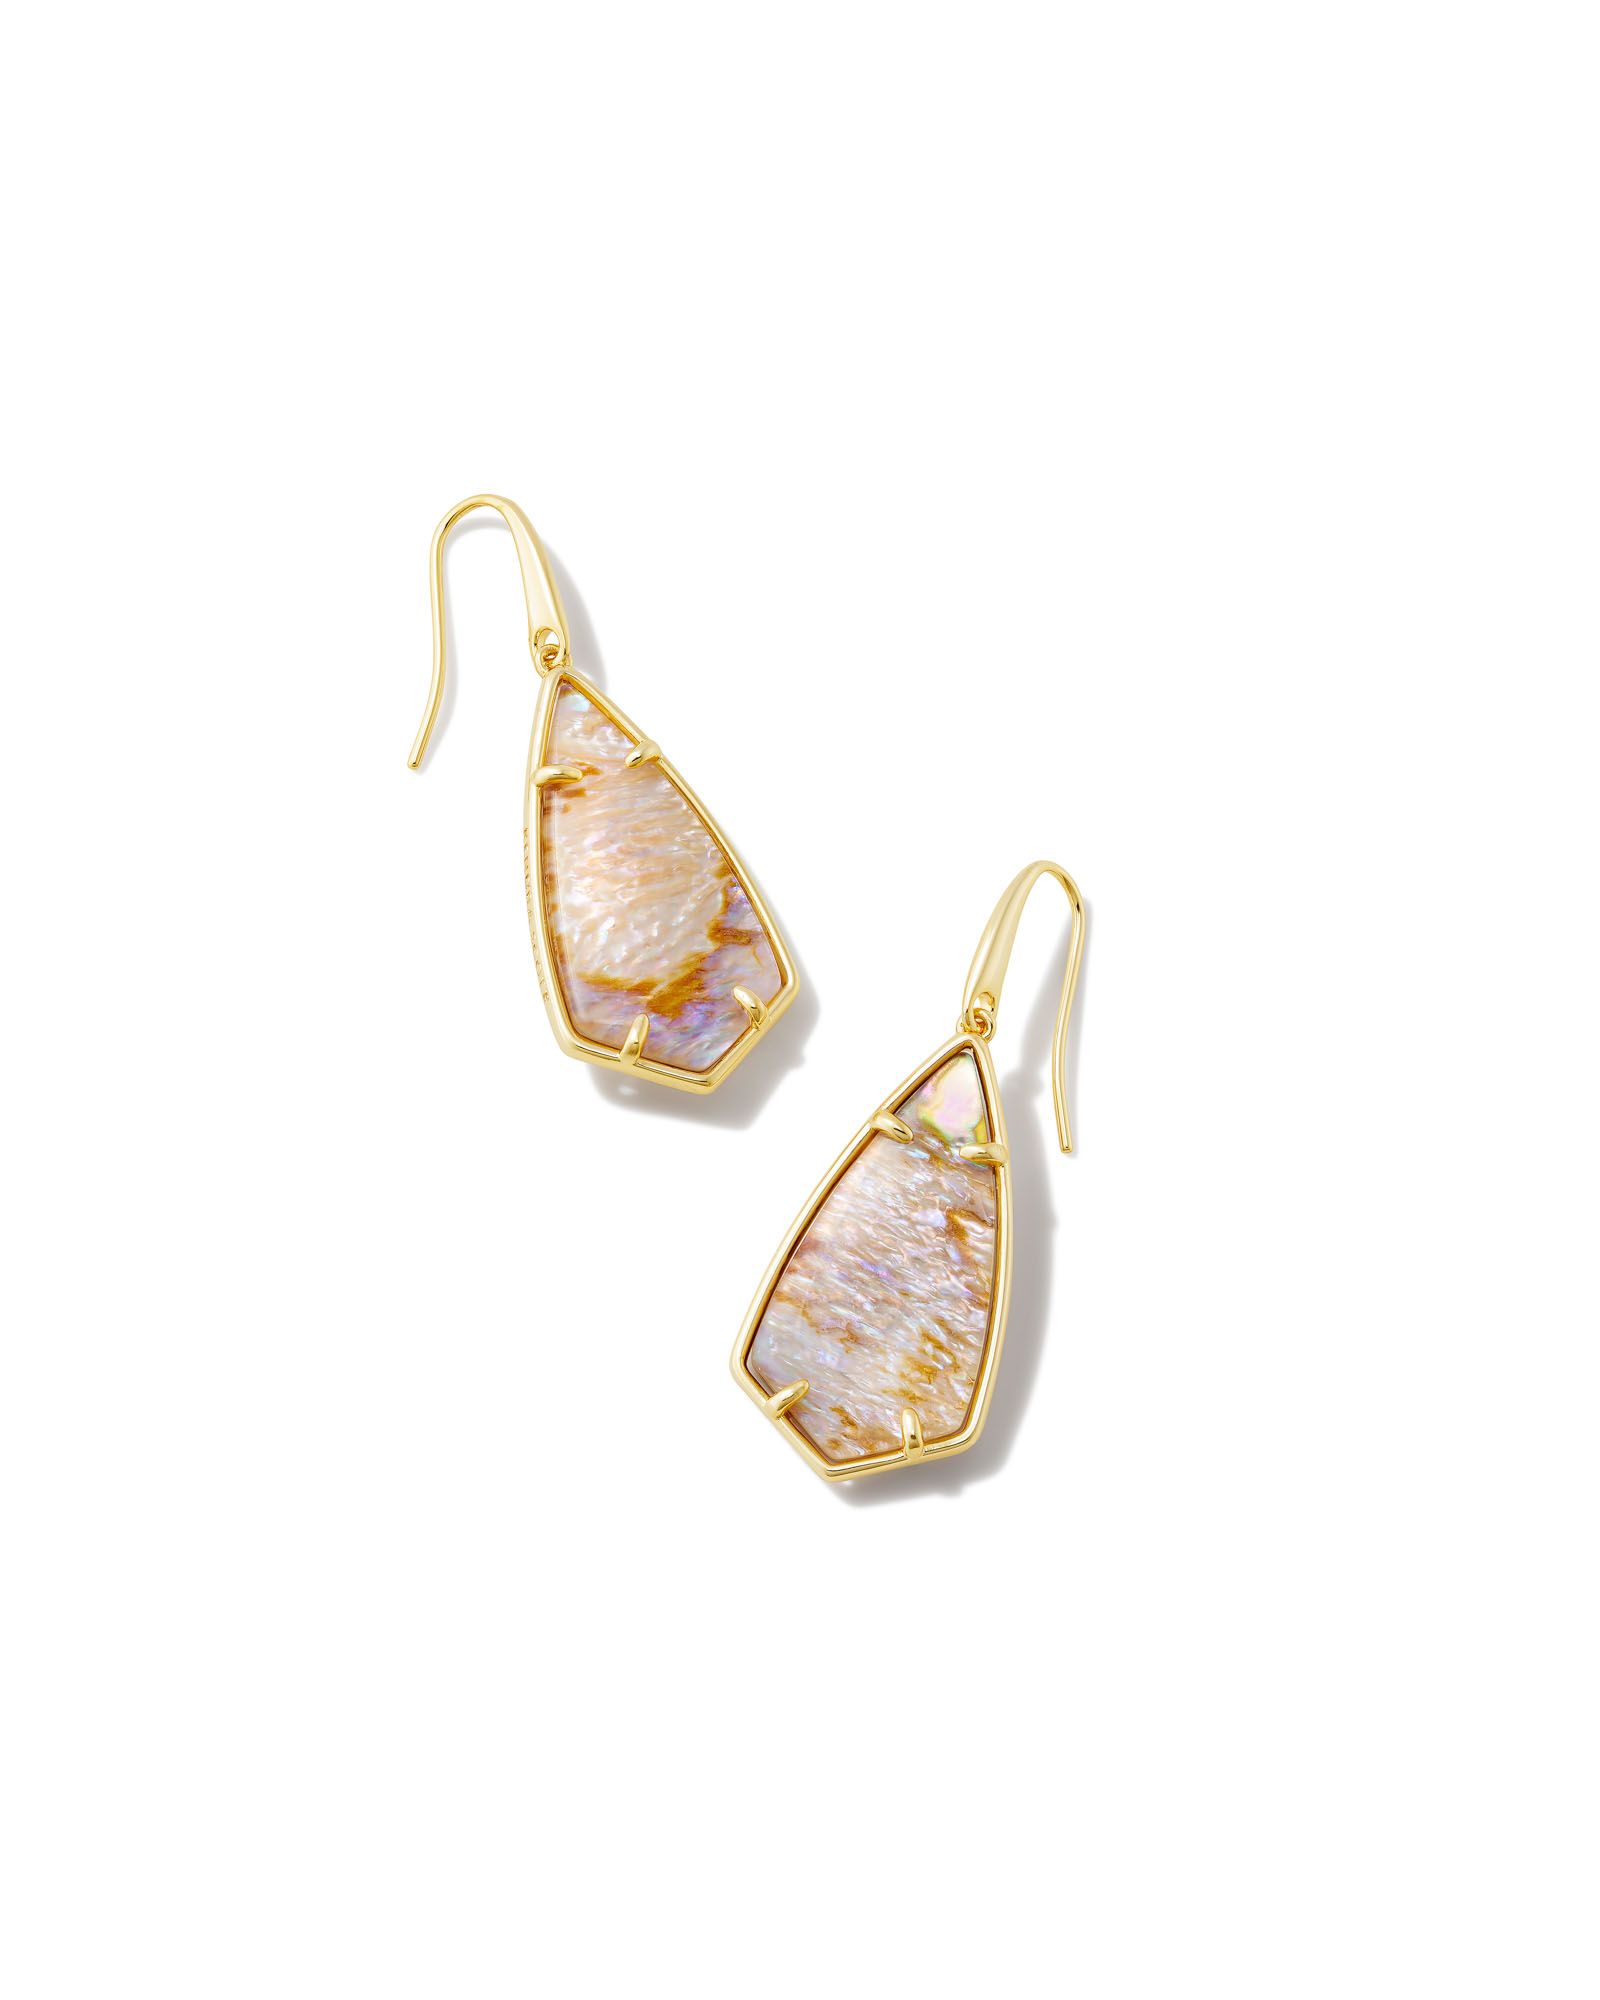 Camry Gold Drop Earrings in Iridescent Abalone | Kendra Scott